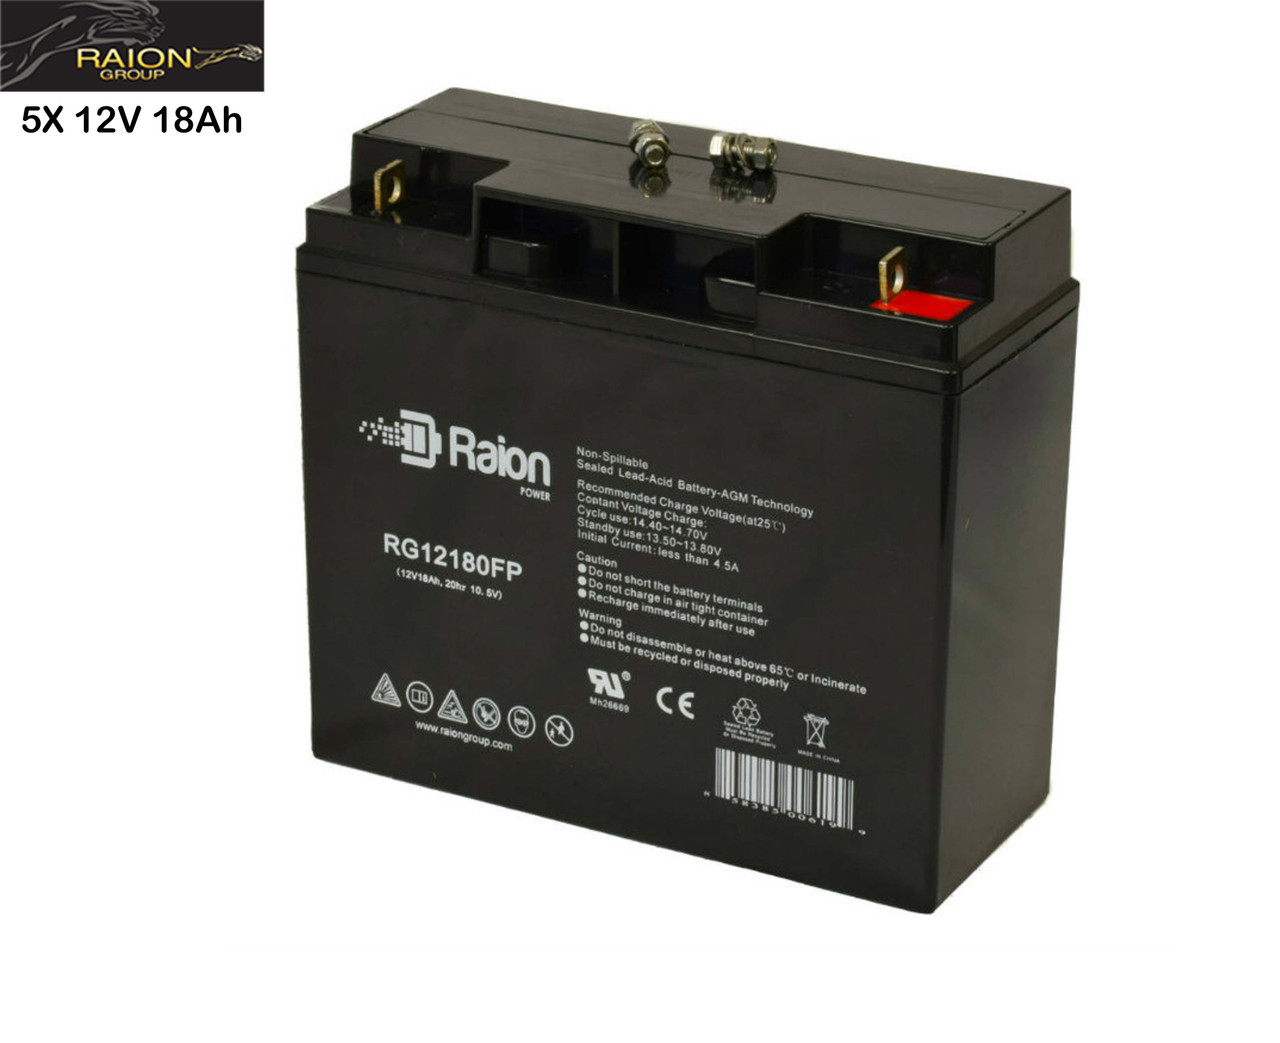 Raion Power Replacement 12V 18Ah Battery for Fun E-Cycle Three Wheeled E-Scooter 108DS - 5 Pack